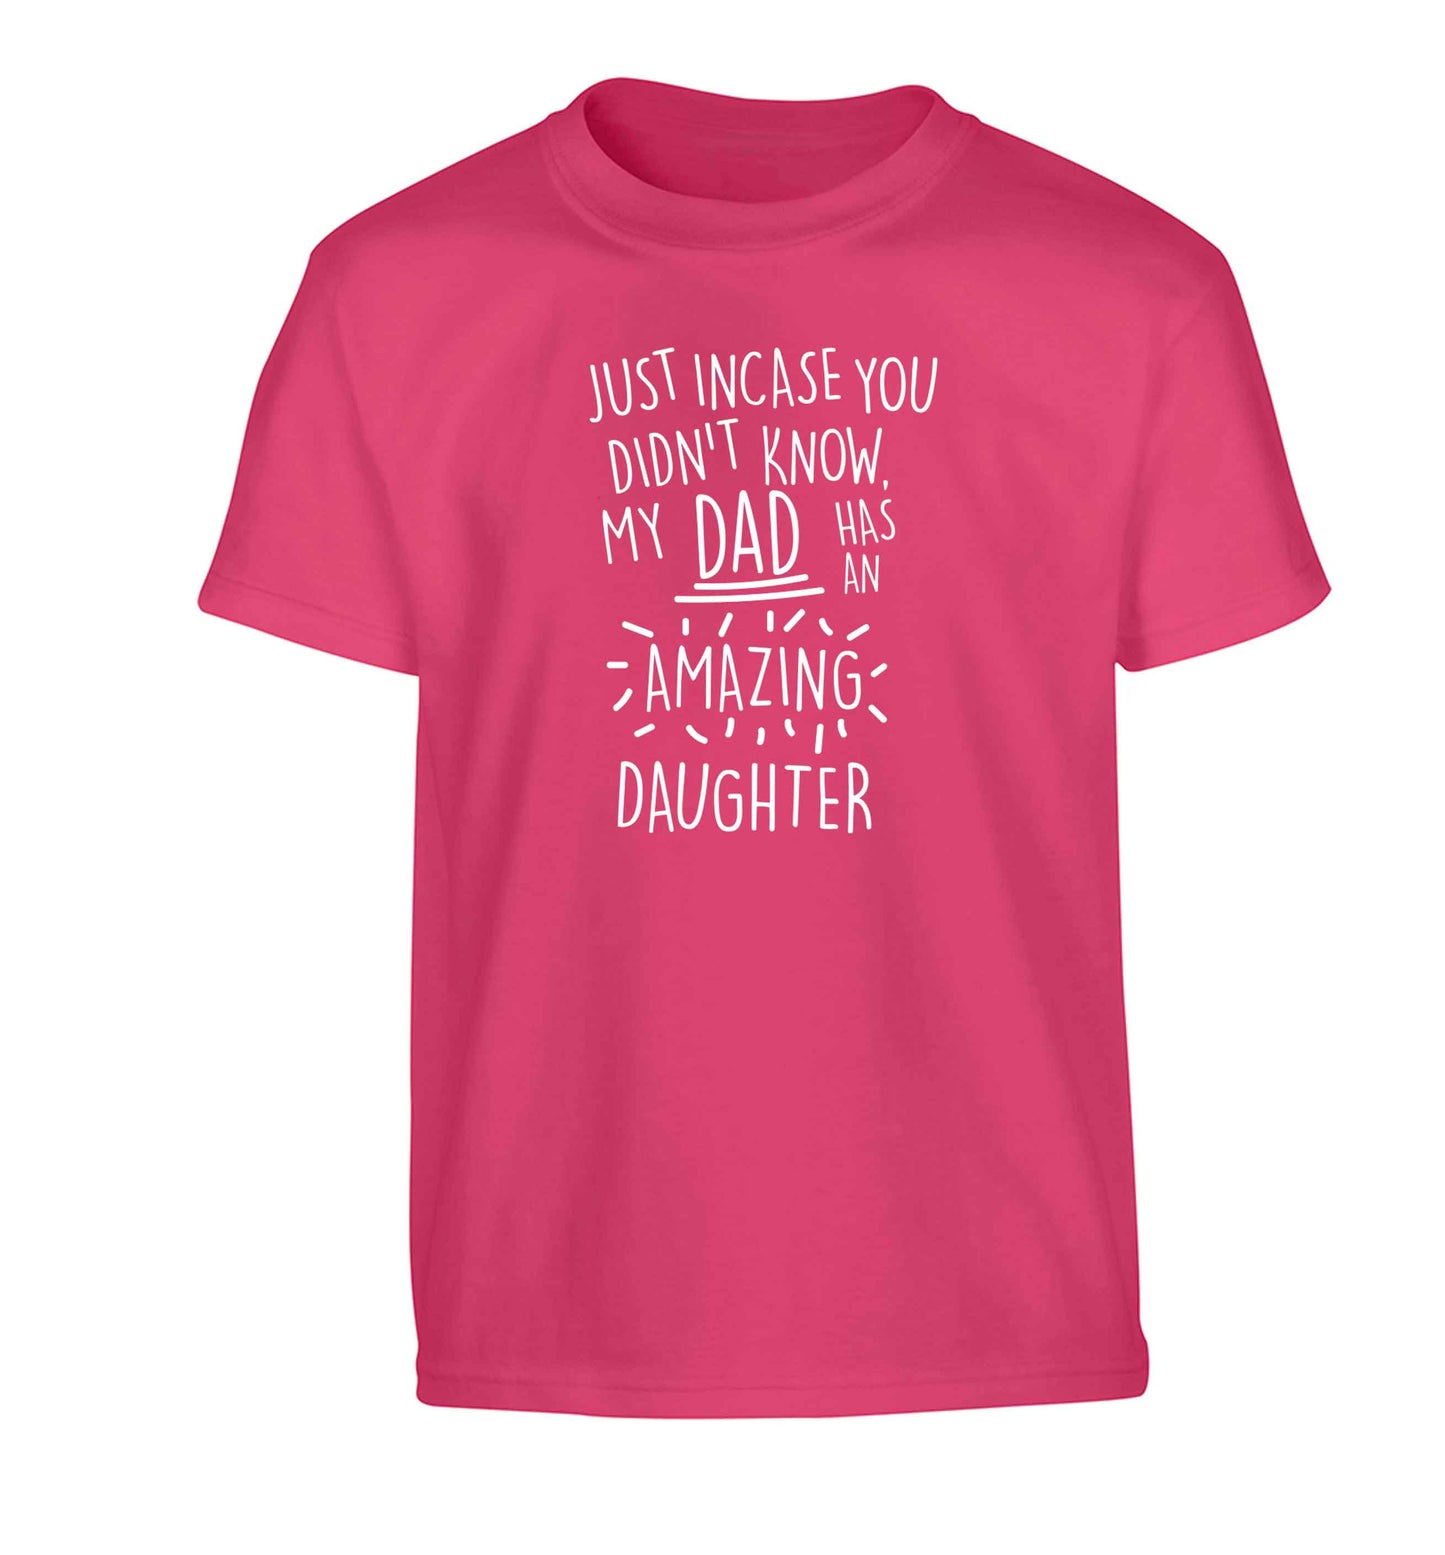 Just incase you didn't know my dad has an amazing daughter Children's pink Tshirt 12-13 Years